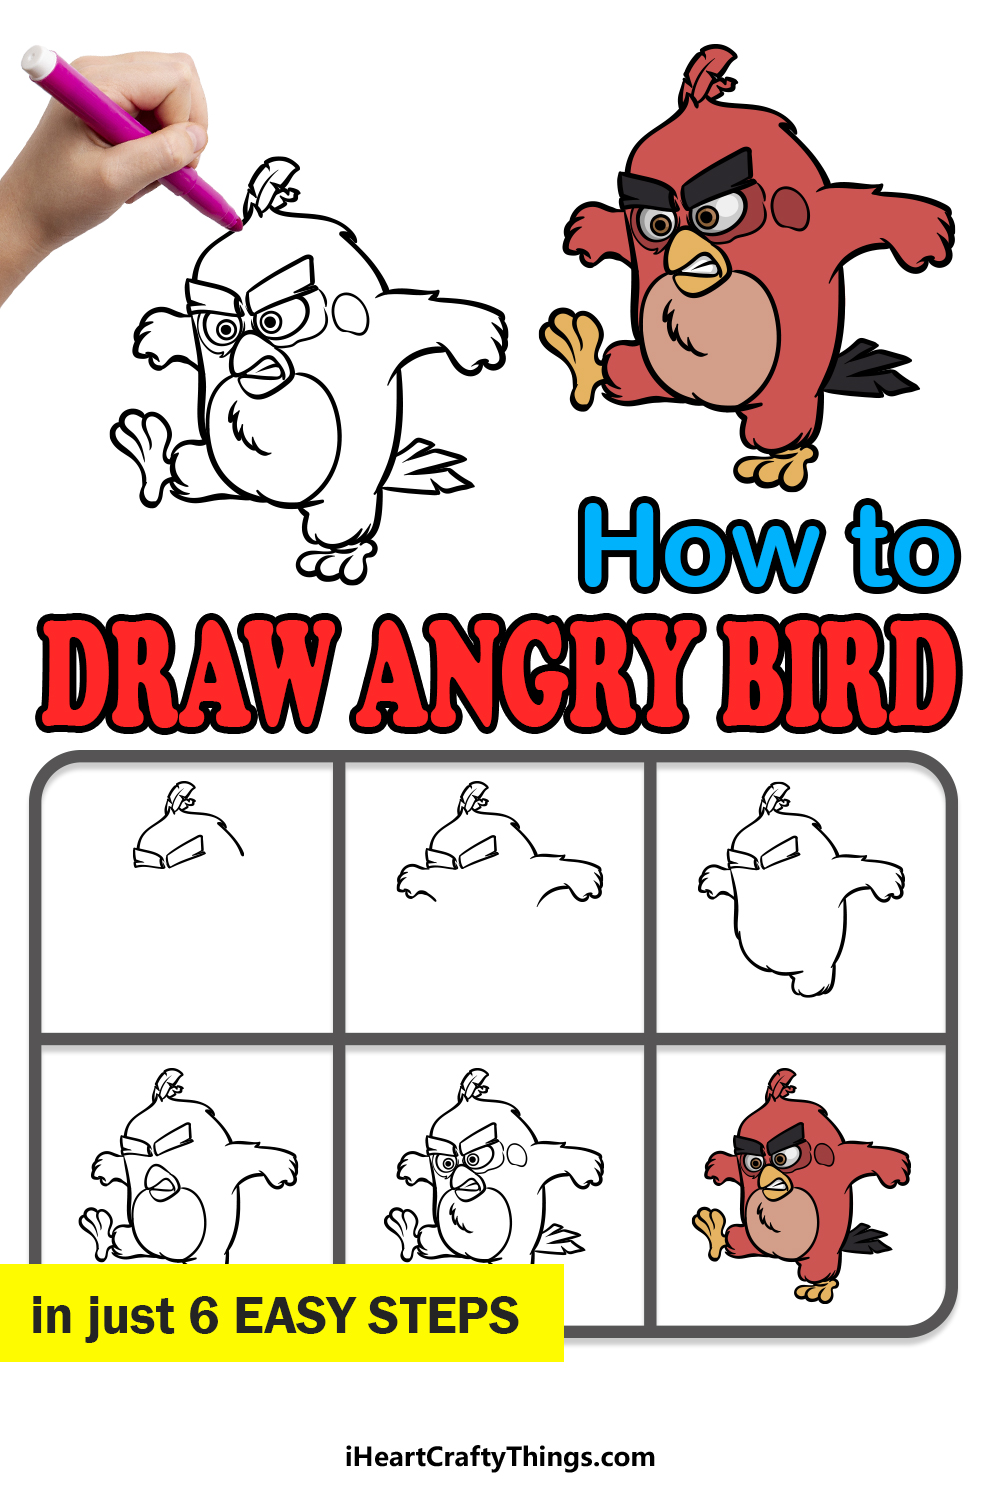 how to draw Angry Bird in 6 easy steps